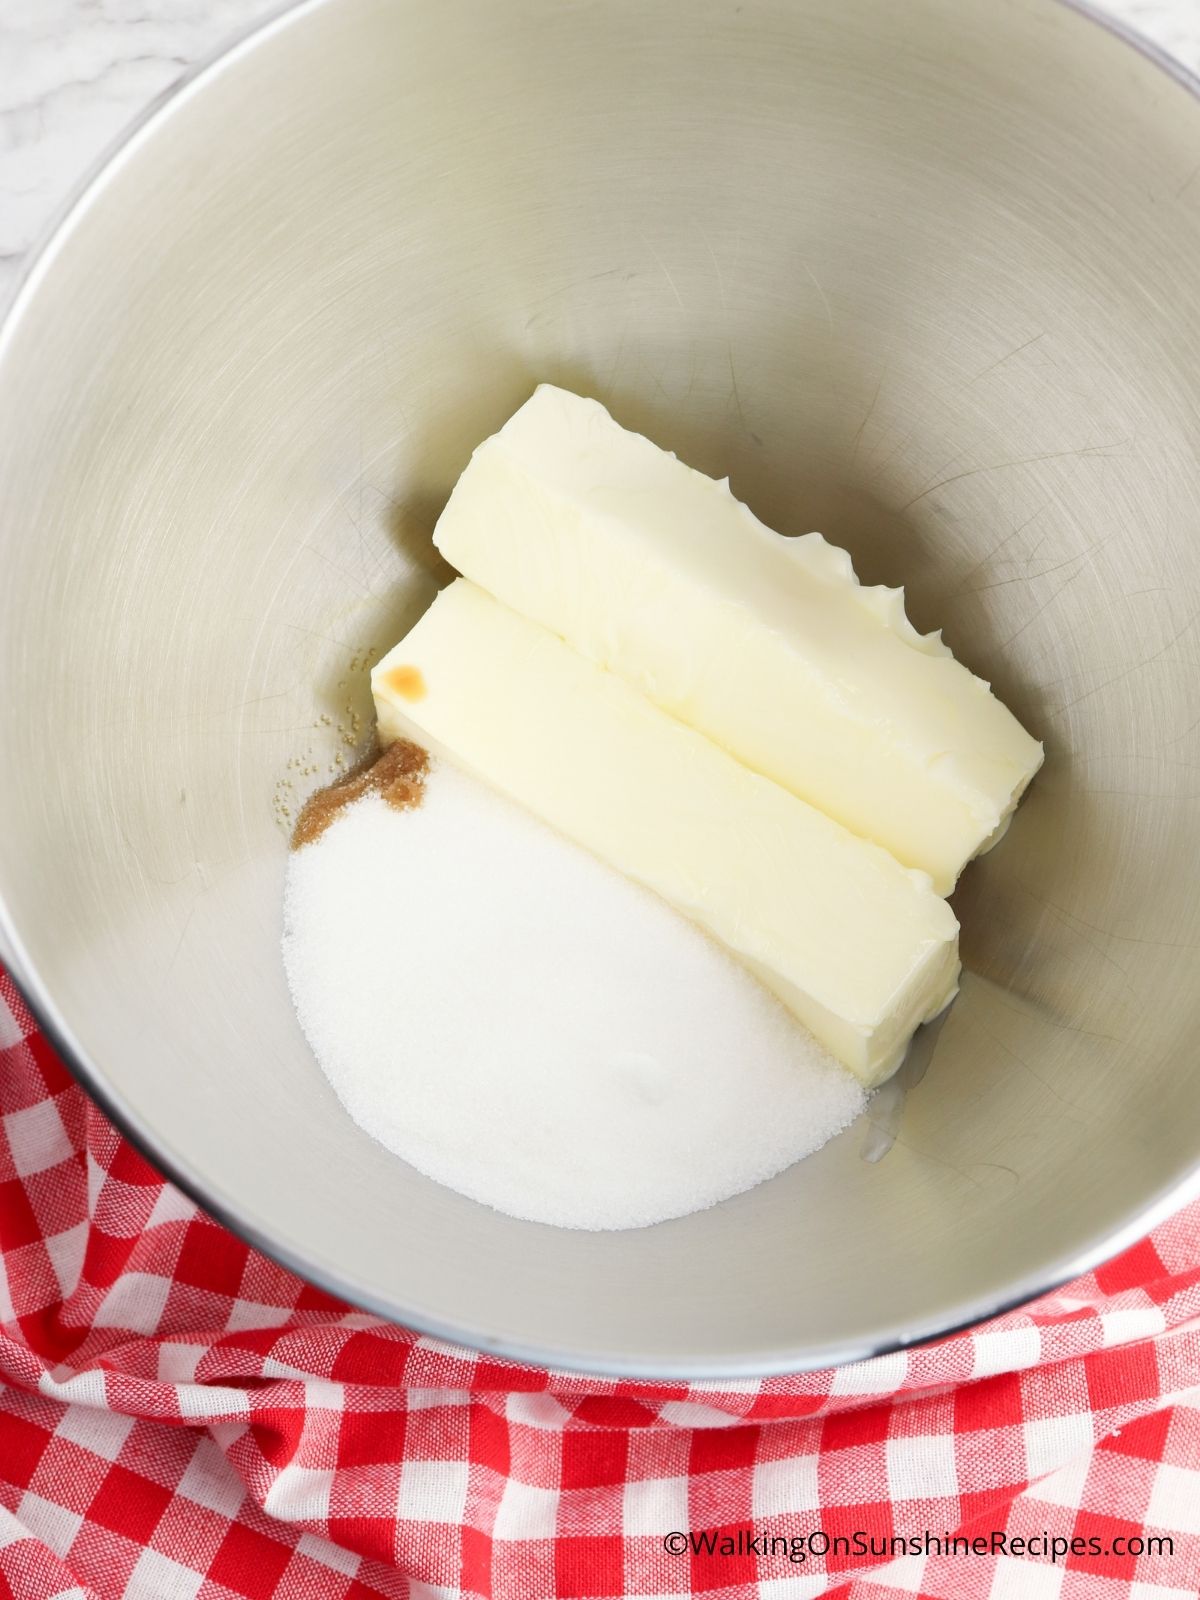 Combine butter with sugar in KitchenAid Mixer.